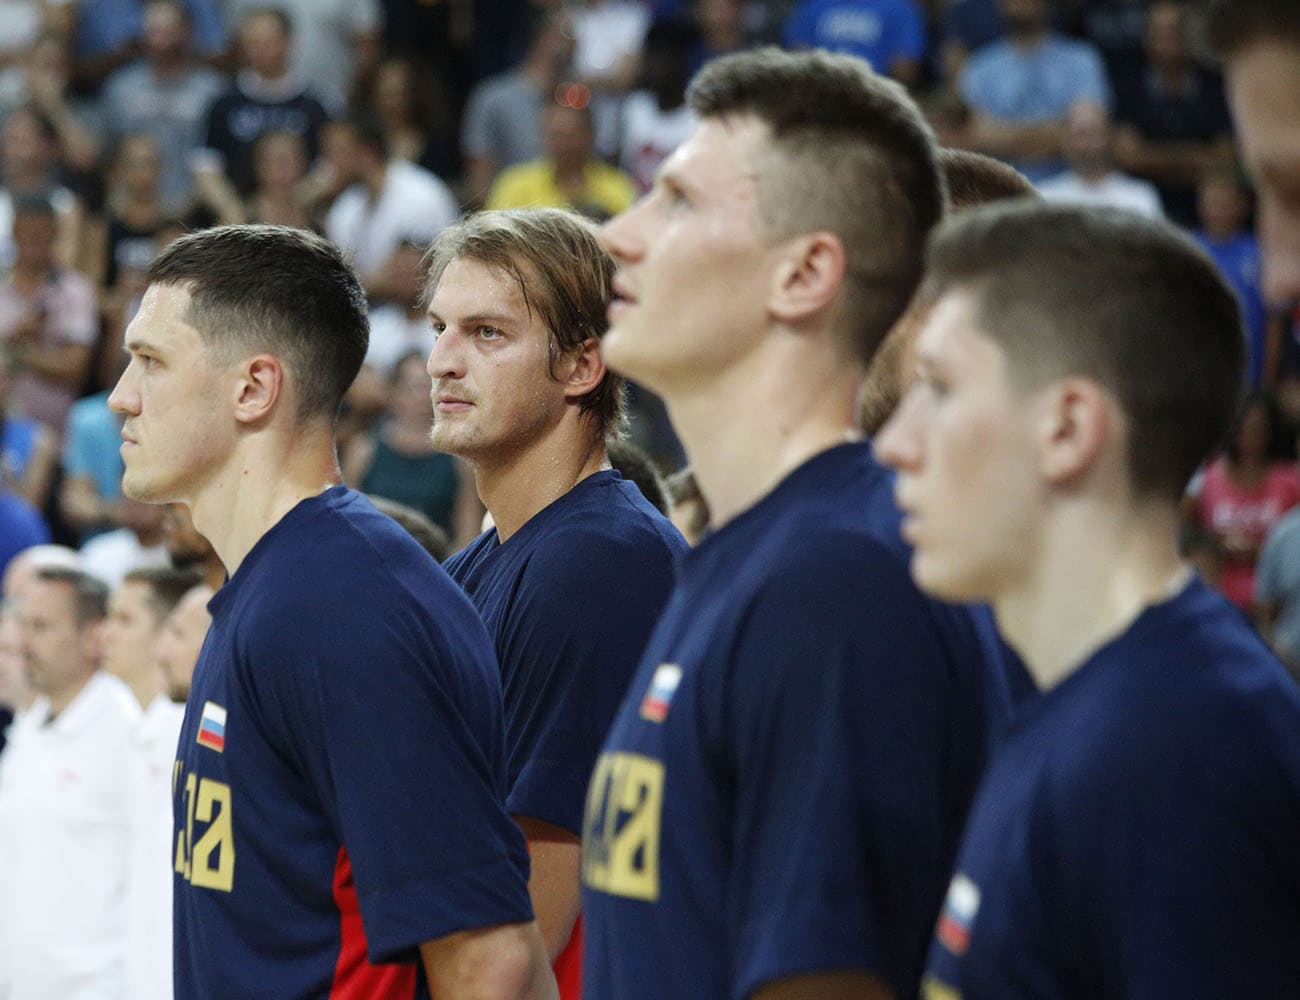 17 League players from 6 clubs will play in 2019 FIBA World Cup